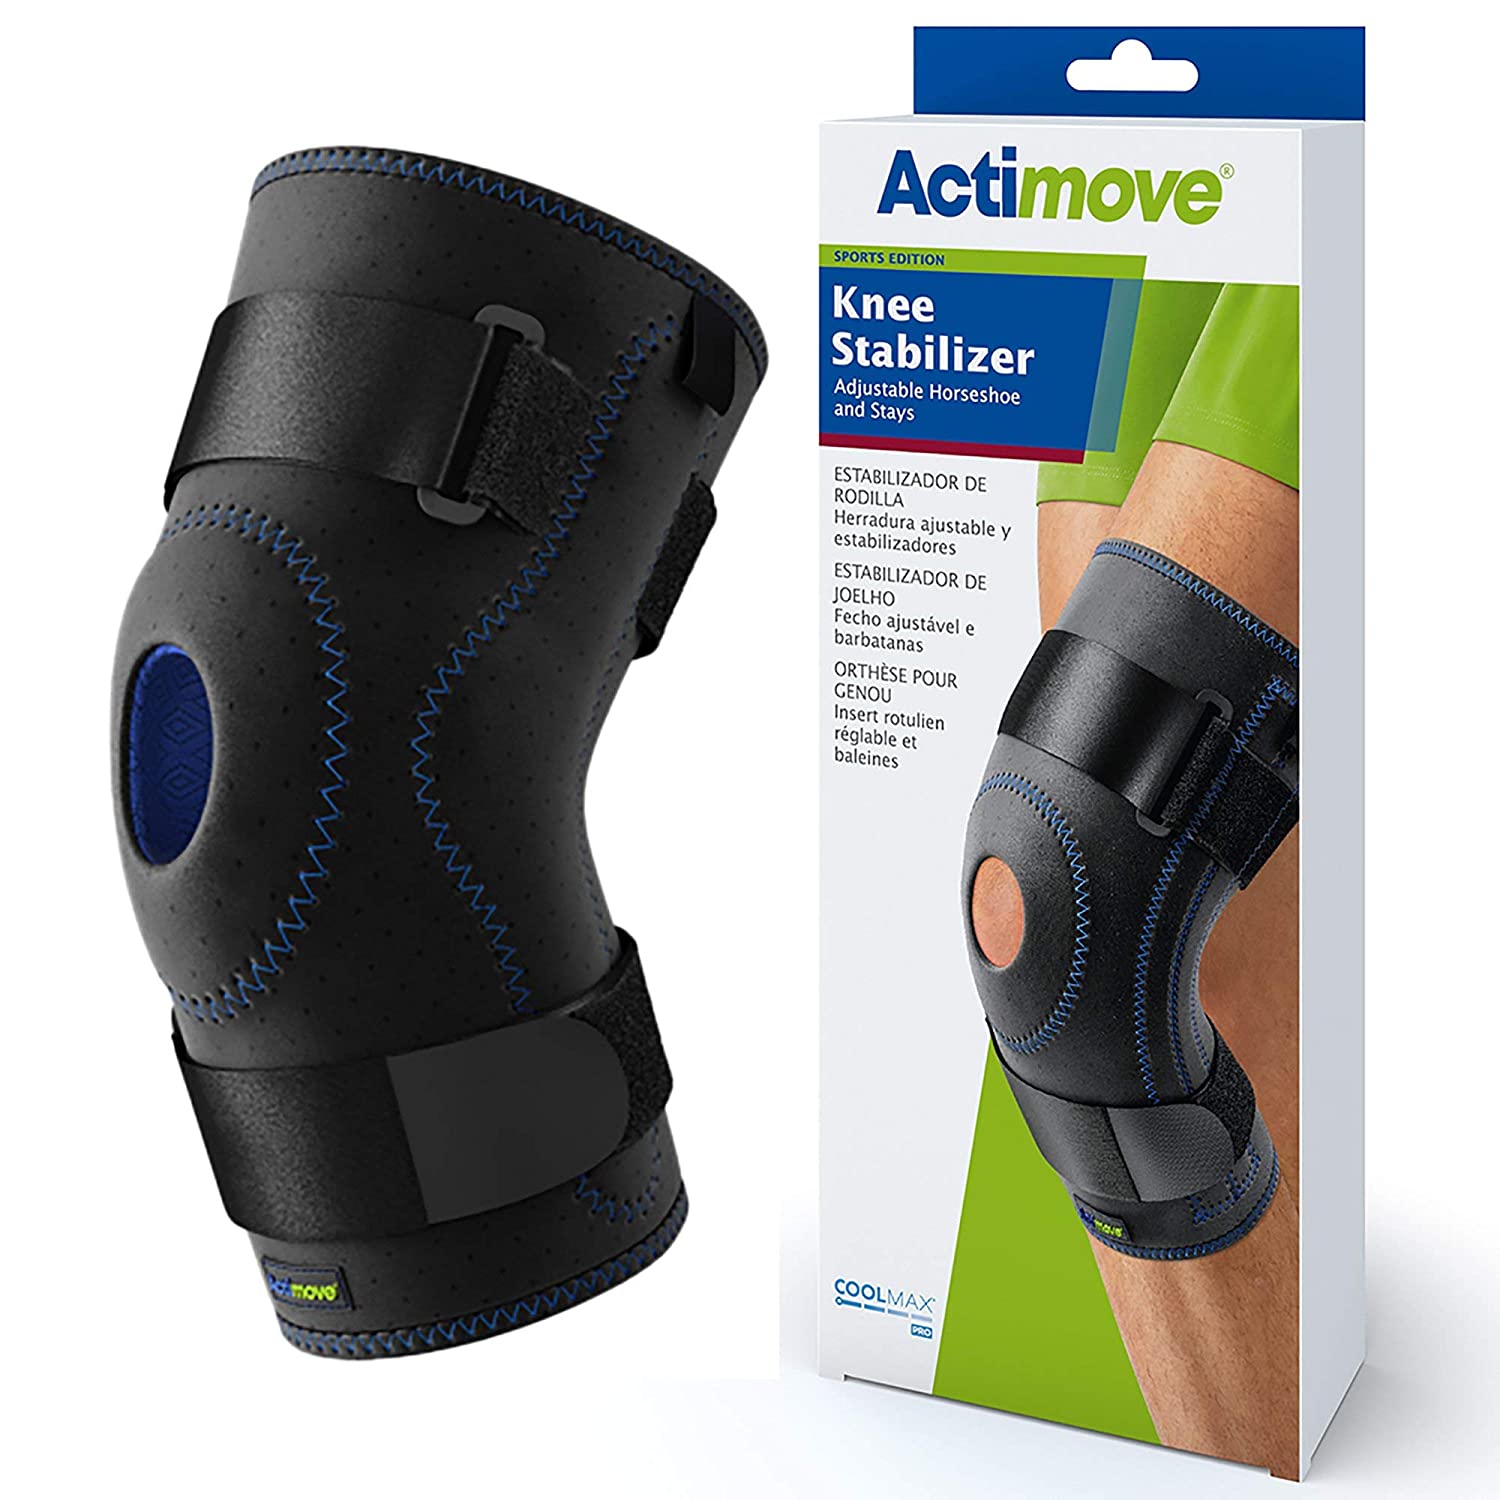 Actimove Knee Stabilizer W/ Adjustable Horseshoe & Stays Small, Black - Ea/1 - Home Health Store Inc